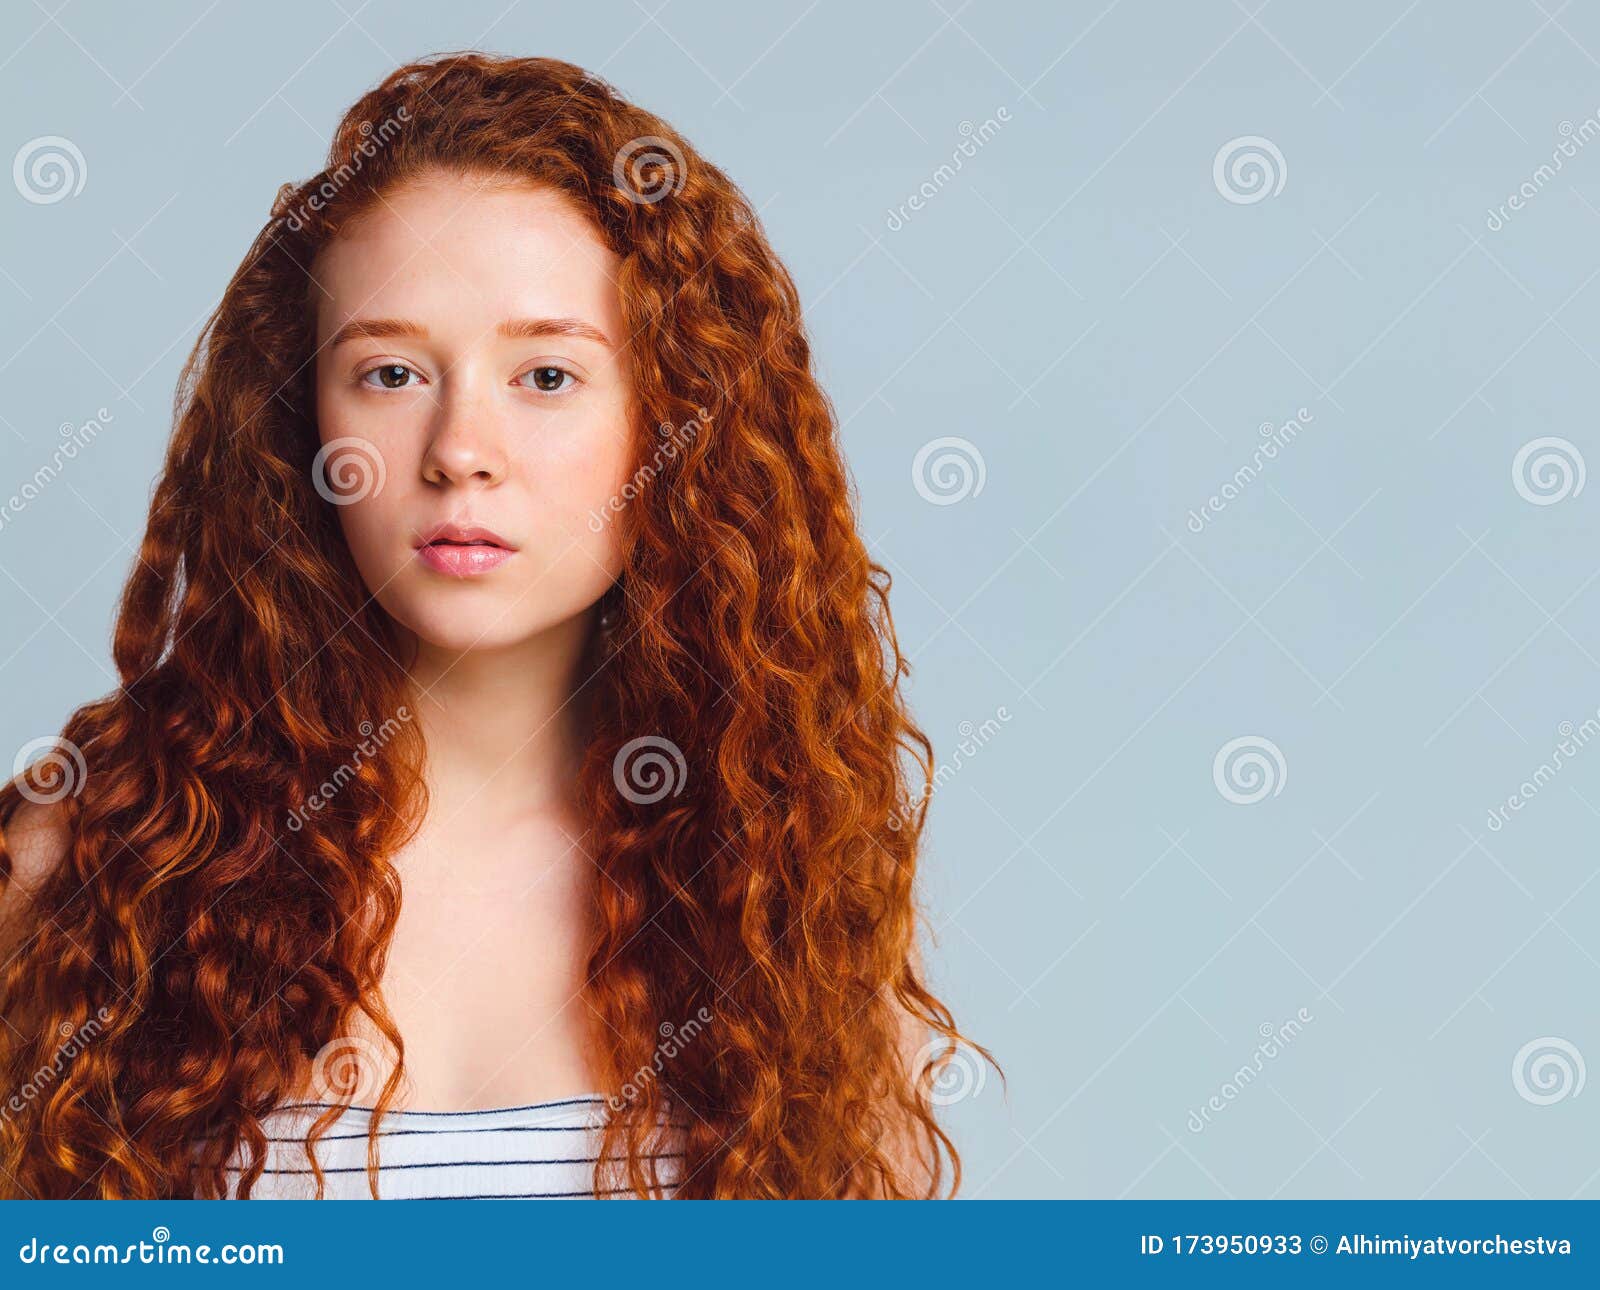 Teenage Girl with Luxurious Long Curly Red Hair on a Blue Background in the  Studio Stock Image - Image of blue, curly: 173950933